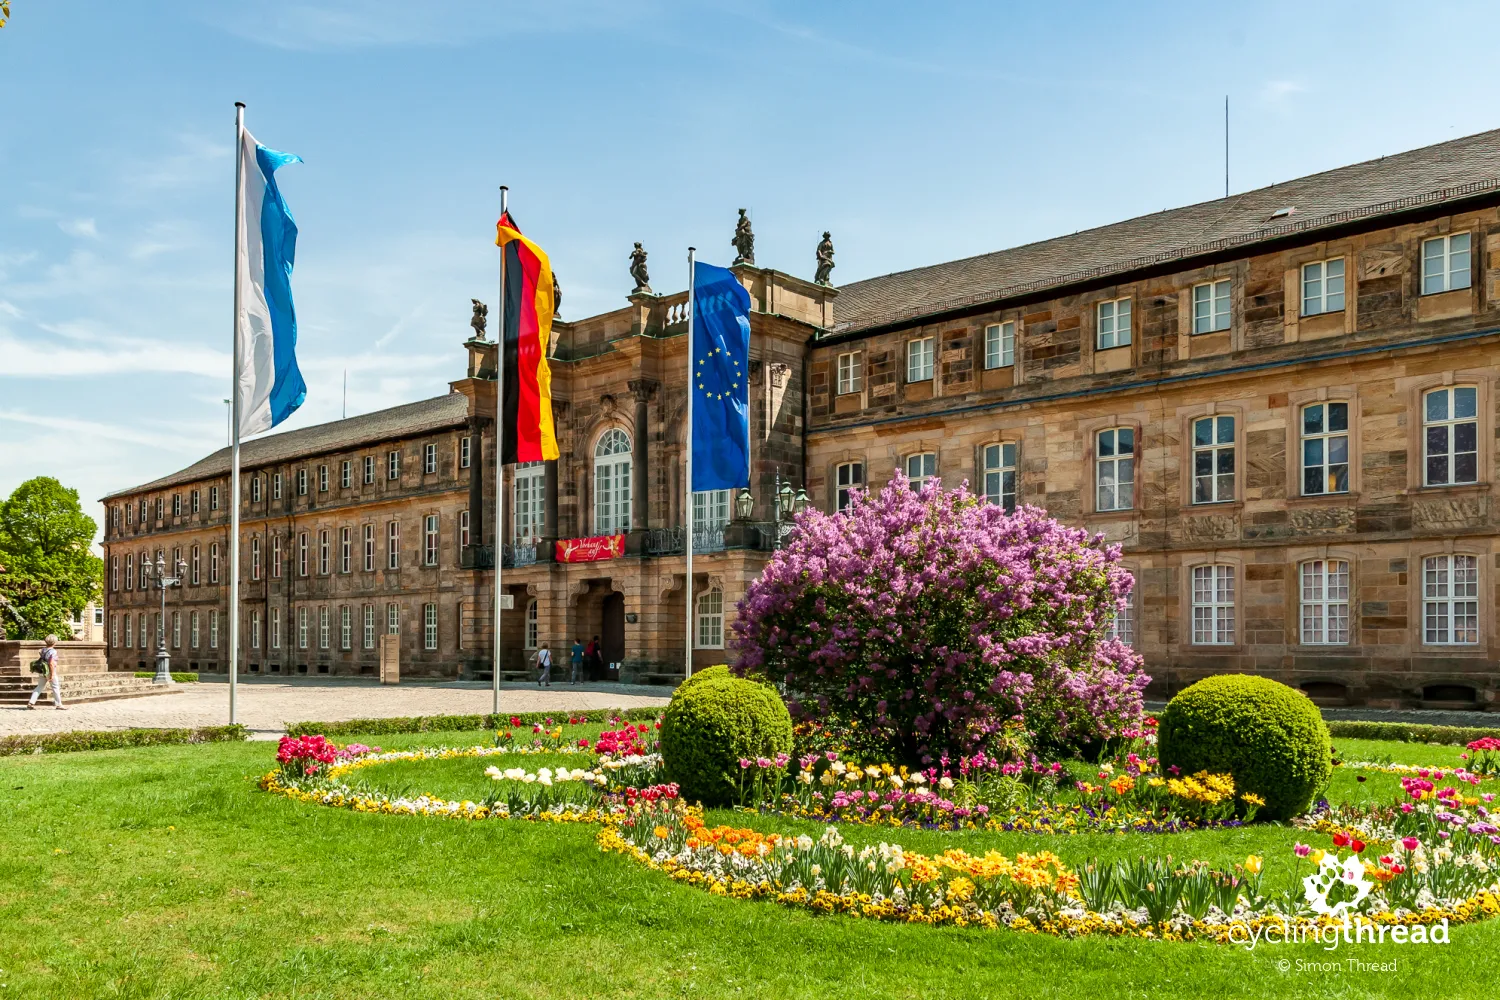 The New Palace in Bayreuth